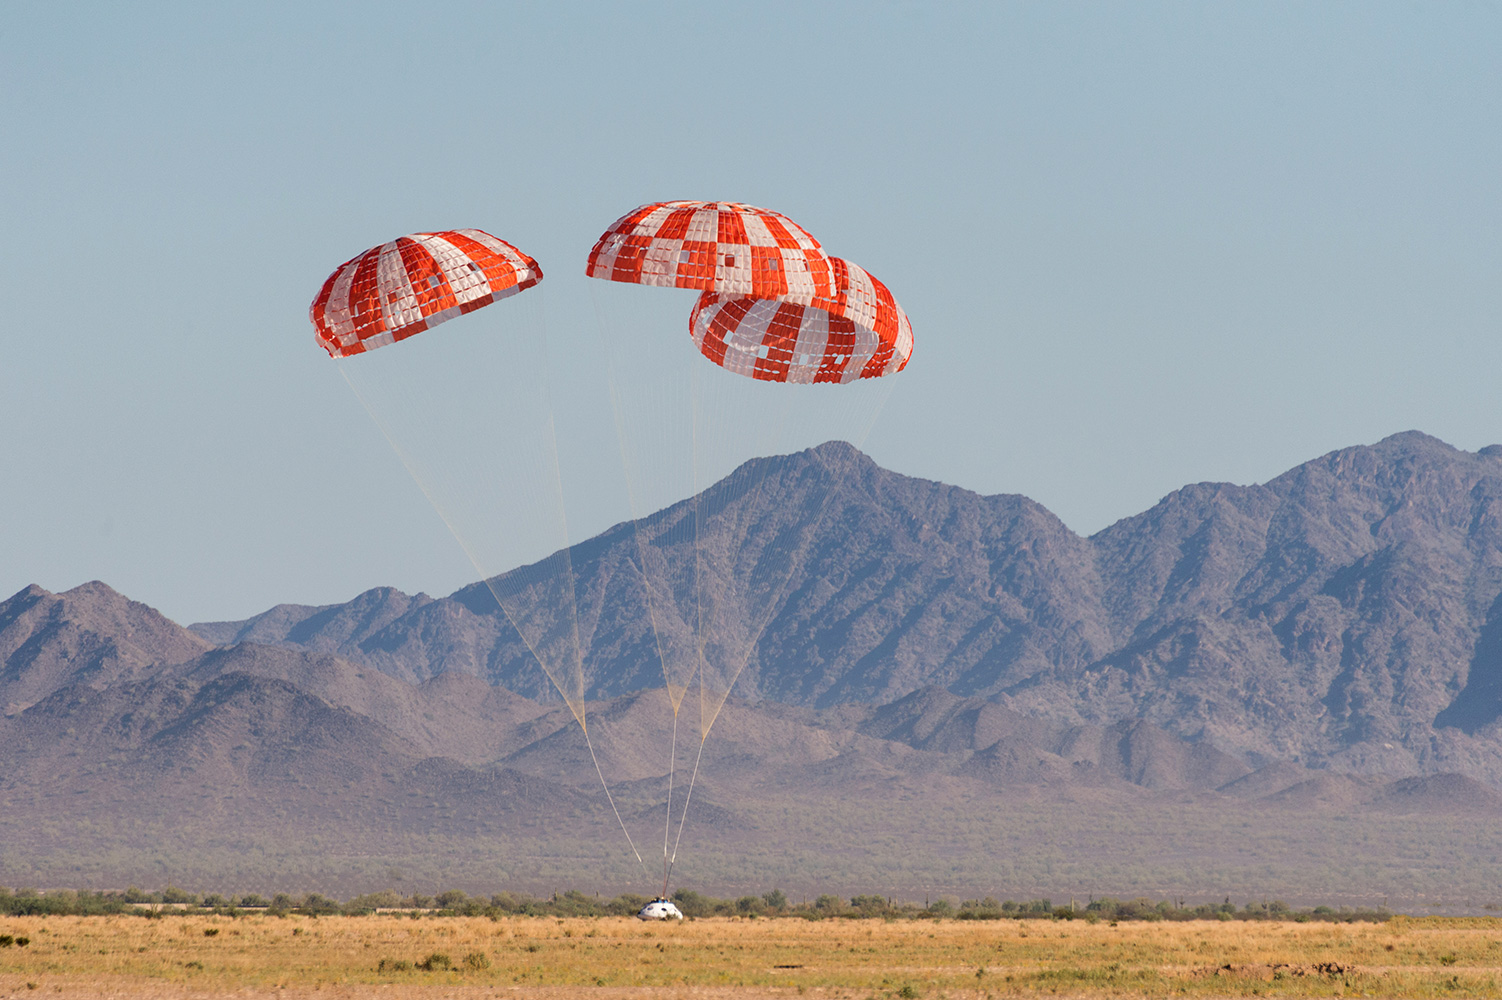 The evaluation was the final test to qualify Orion’s parachute system